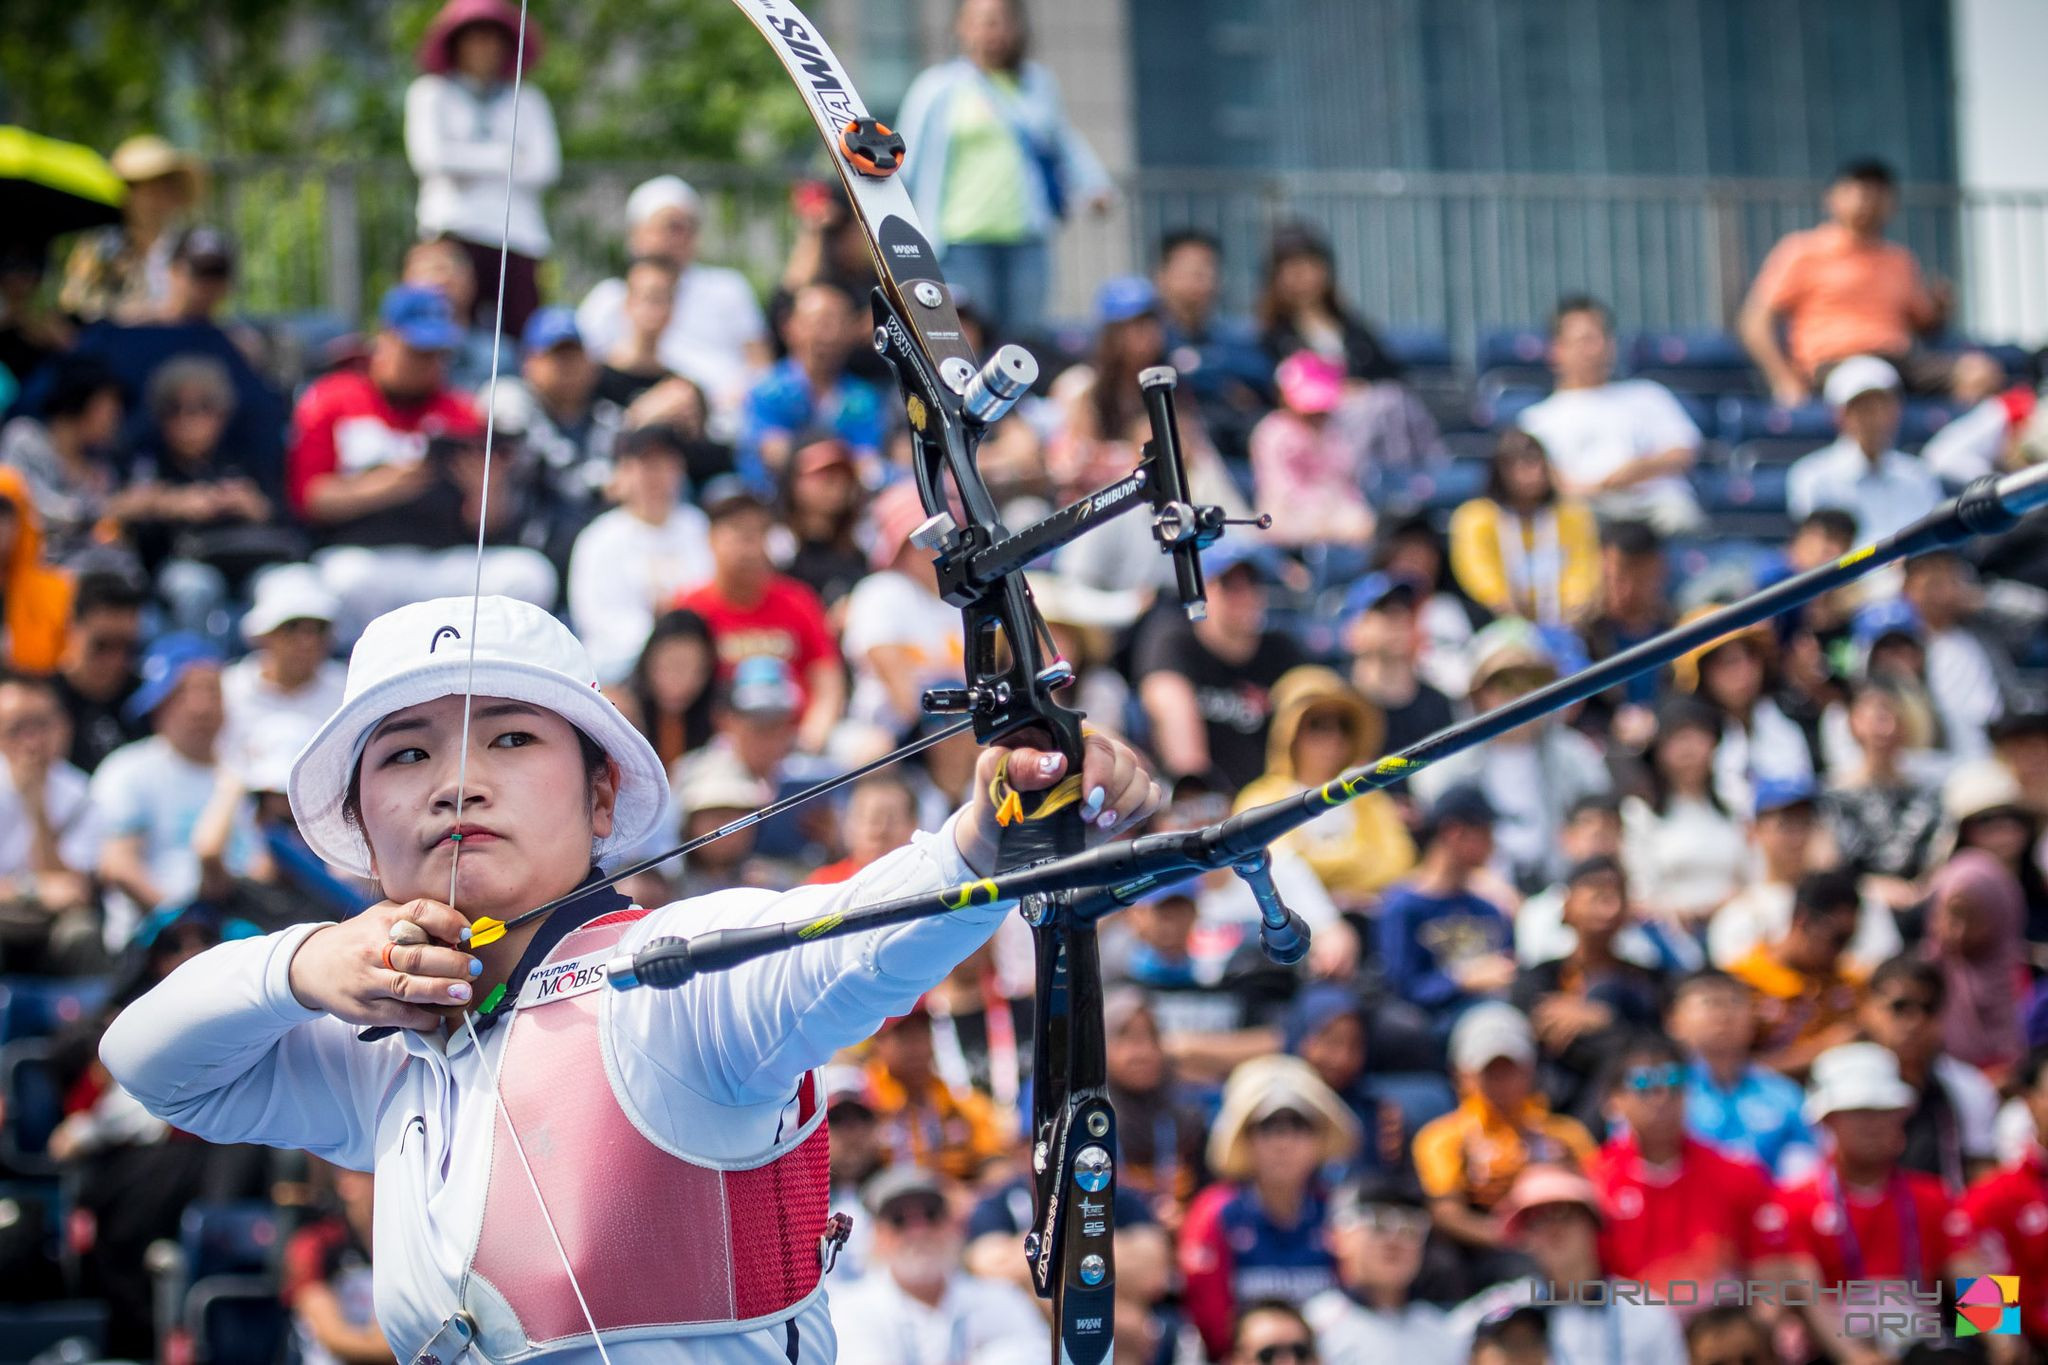 South Korea’s Kang Chae-young finished the day with golds in the recurve women's singles and team events at the Archery World Cup in Shanghai ©World Archery